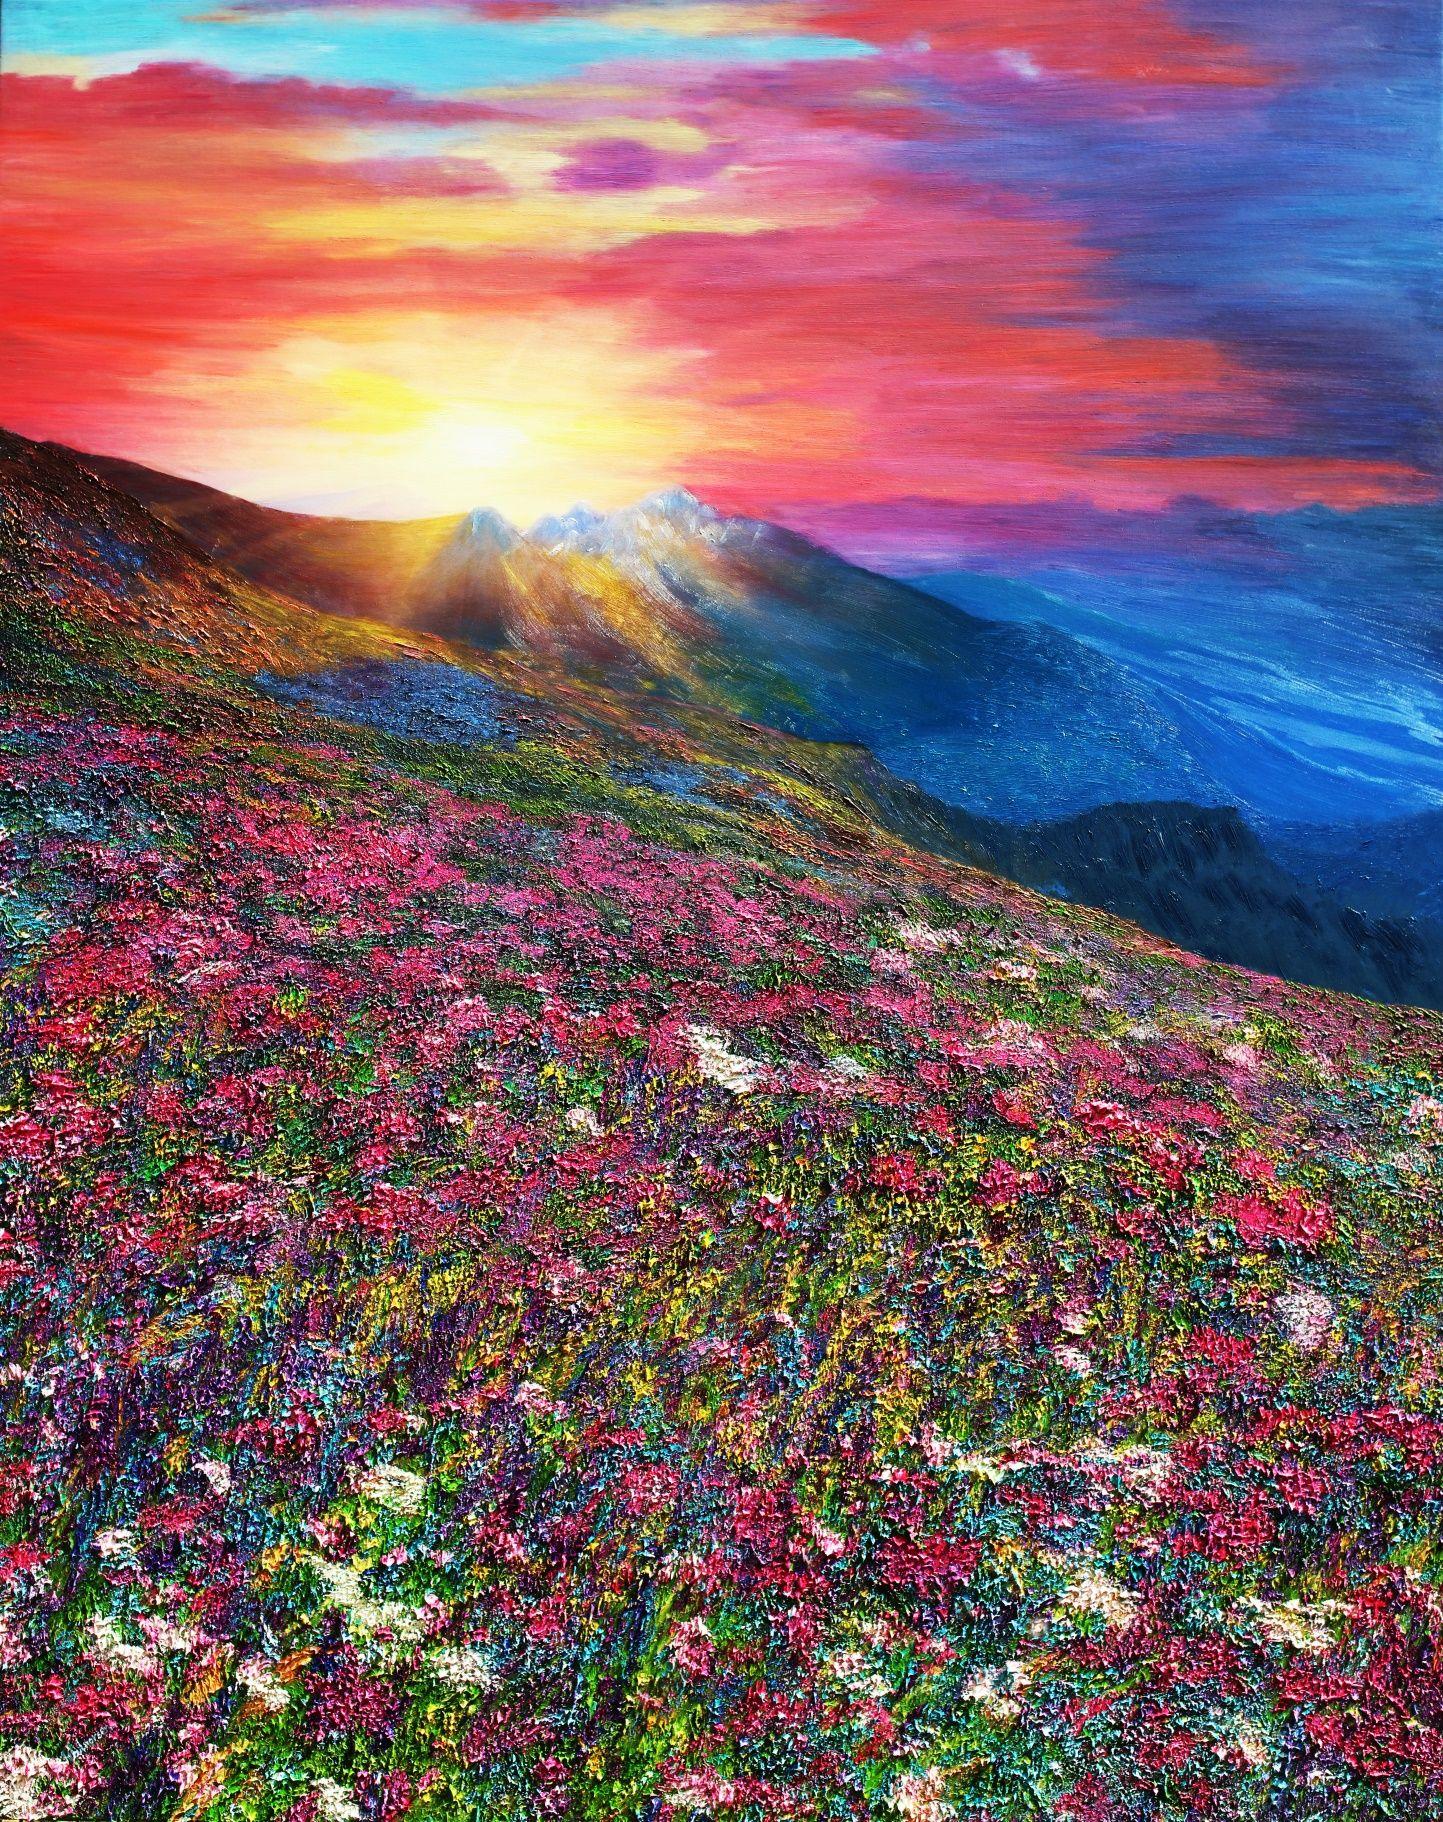 The sun pays homage to the purple haze of crocus flowers as they give a sense of life and added beauty to the hillside. The feeling is respect.    The painting is executed in Clear Impressionism style in thick oils with bright colors, fluid motion,